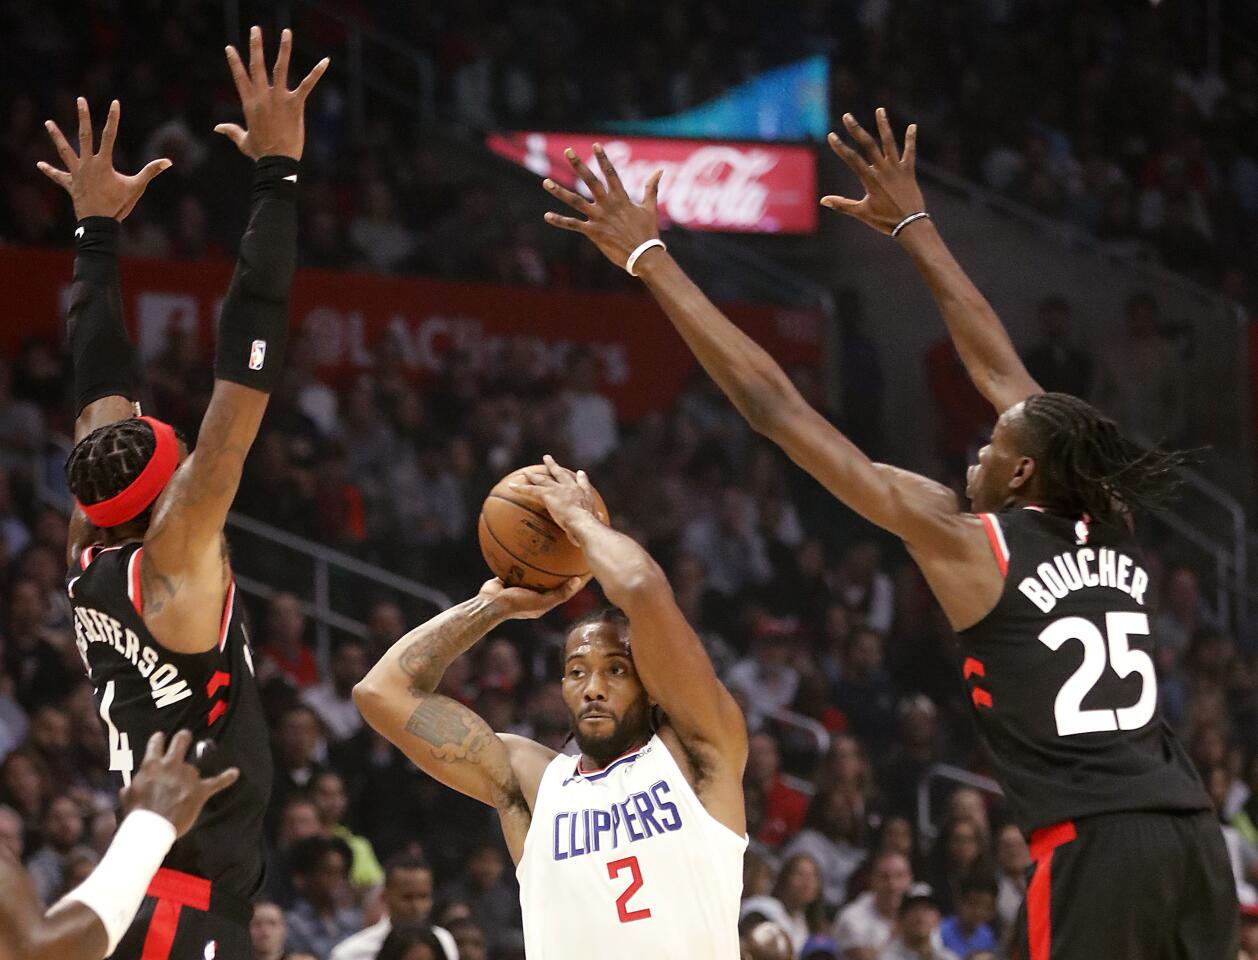 Clippers forward Kawhi Leonard looks for a passing lane against the Raptors during a game Nov. 11 at Staples Center.